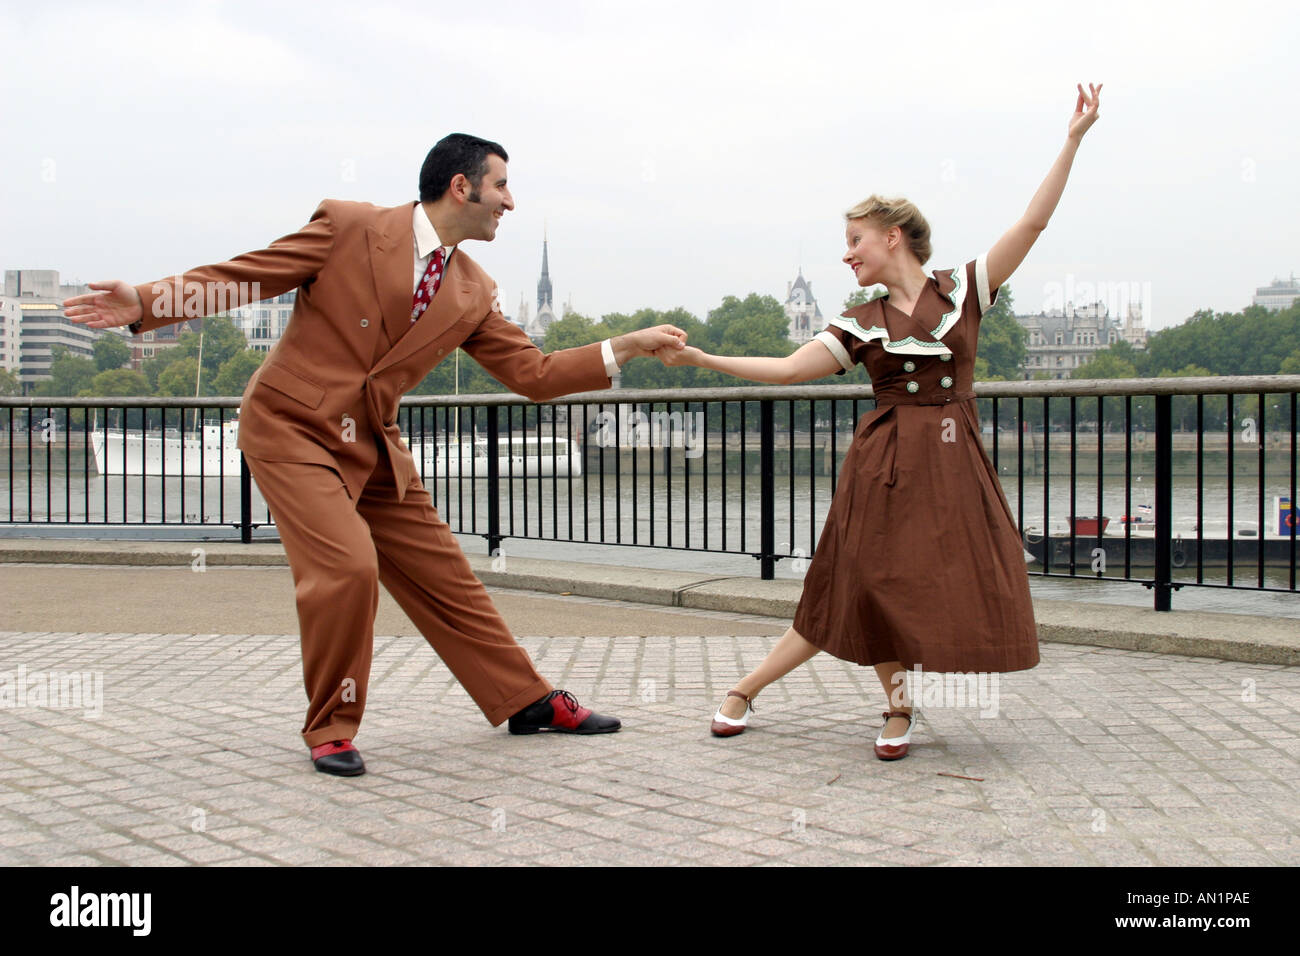 Swing Dancers High Resolution Stock Photography Images - Alamy